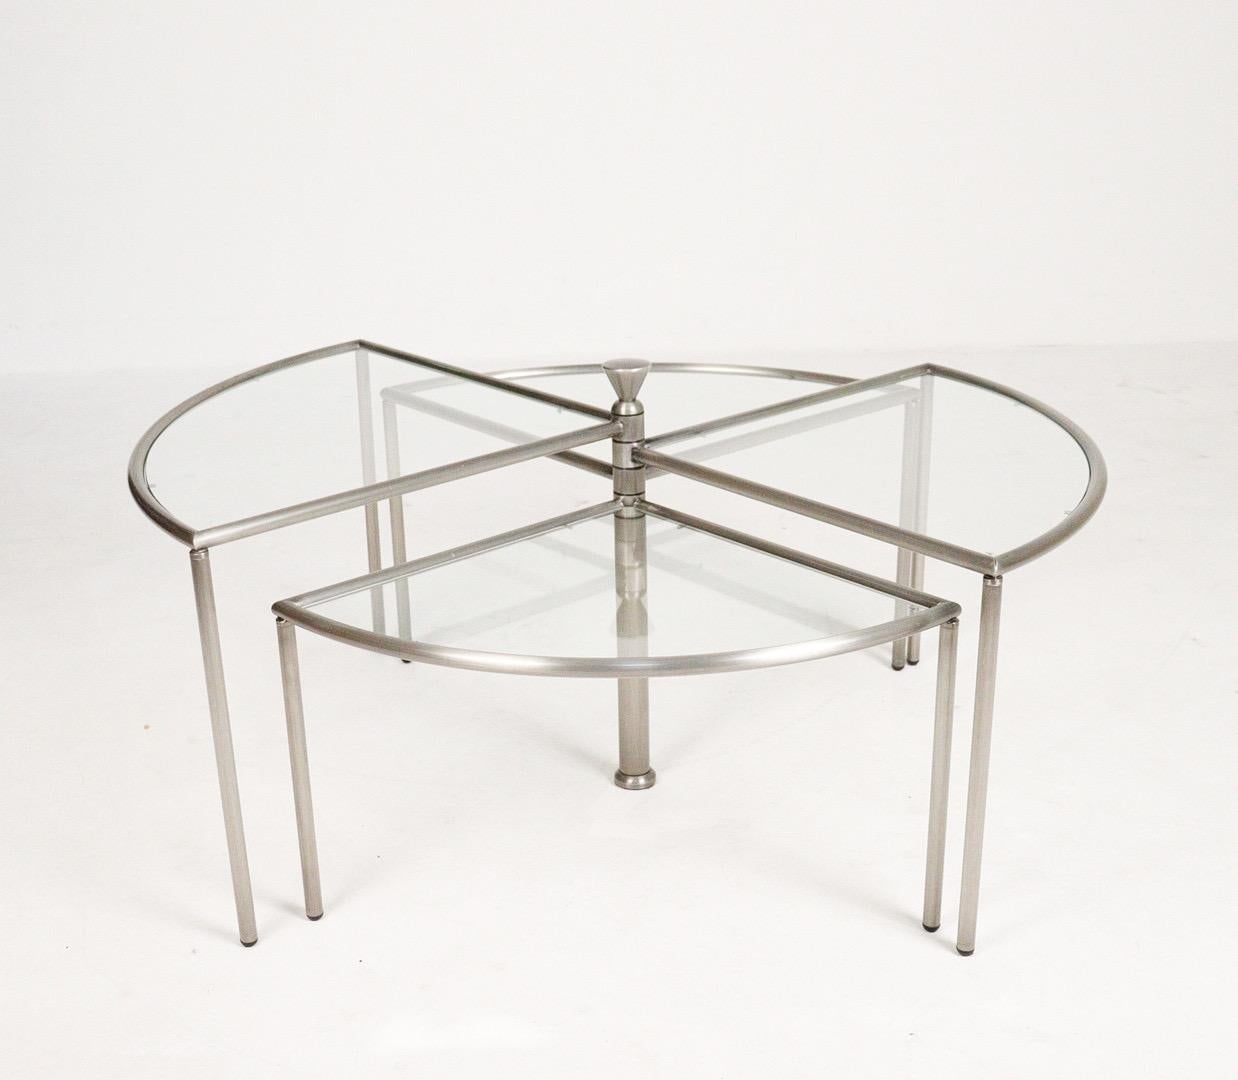 Steel Italian Round Glass Top Side Table with 4 Nesting Elements, 1970s For Sale